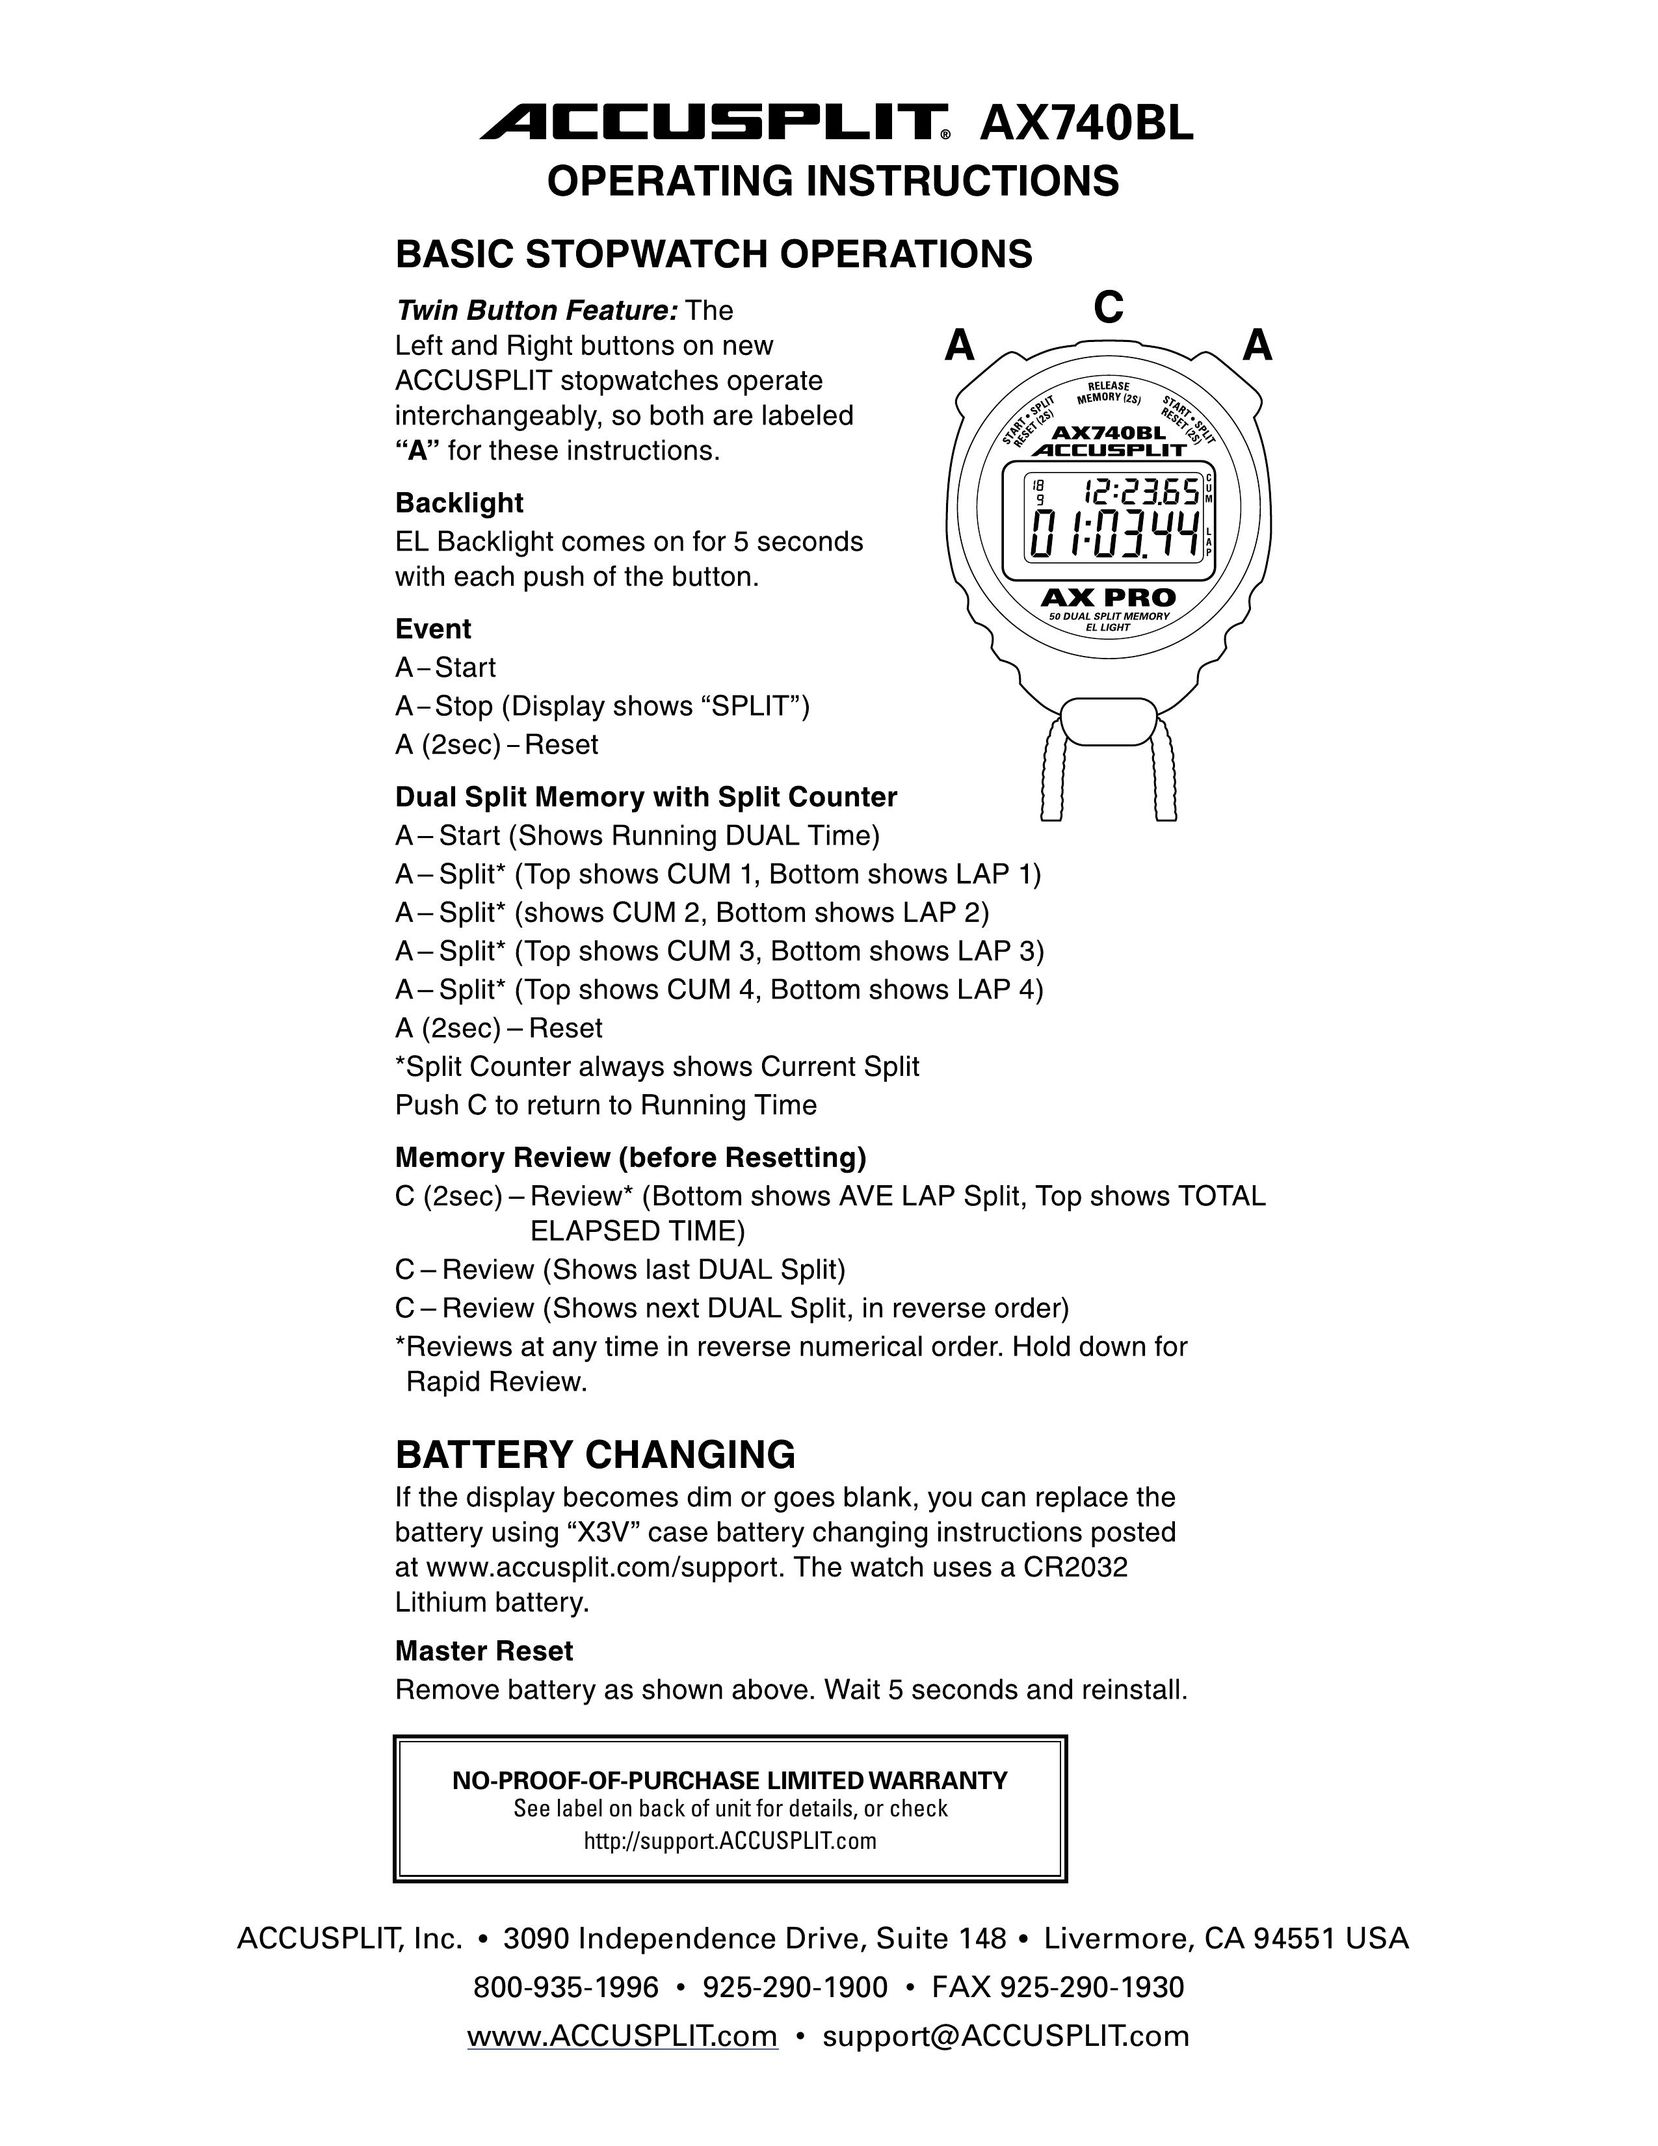 Accusplit AX740BL Heart Rate Monitor User Manual